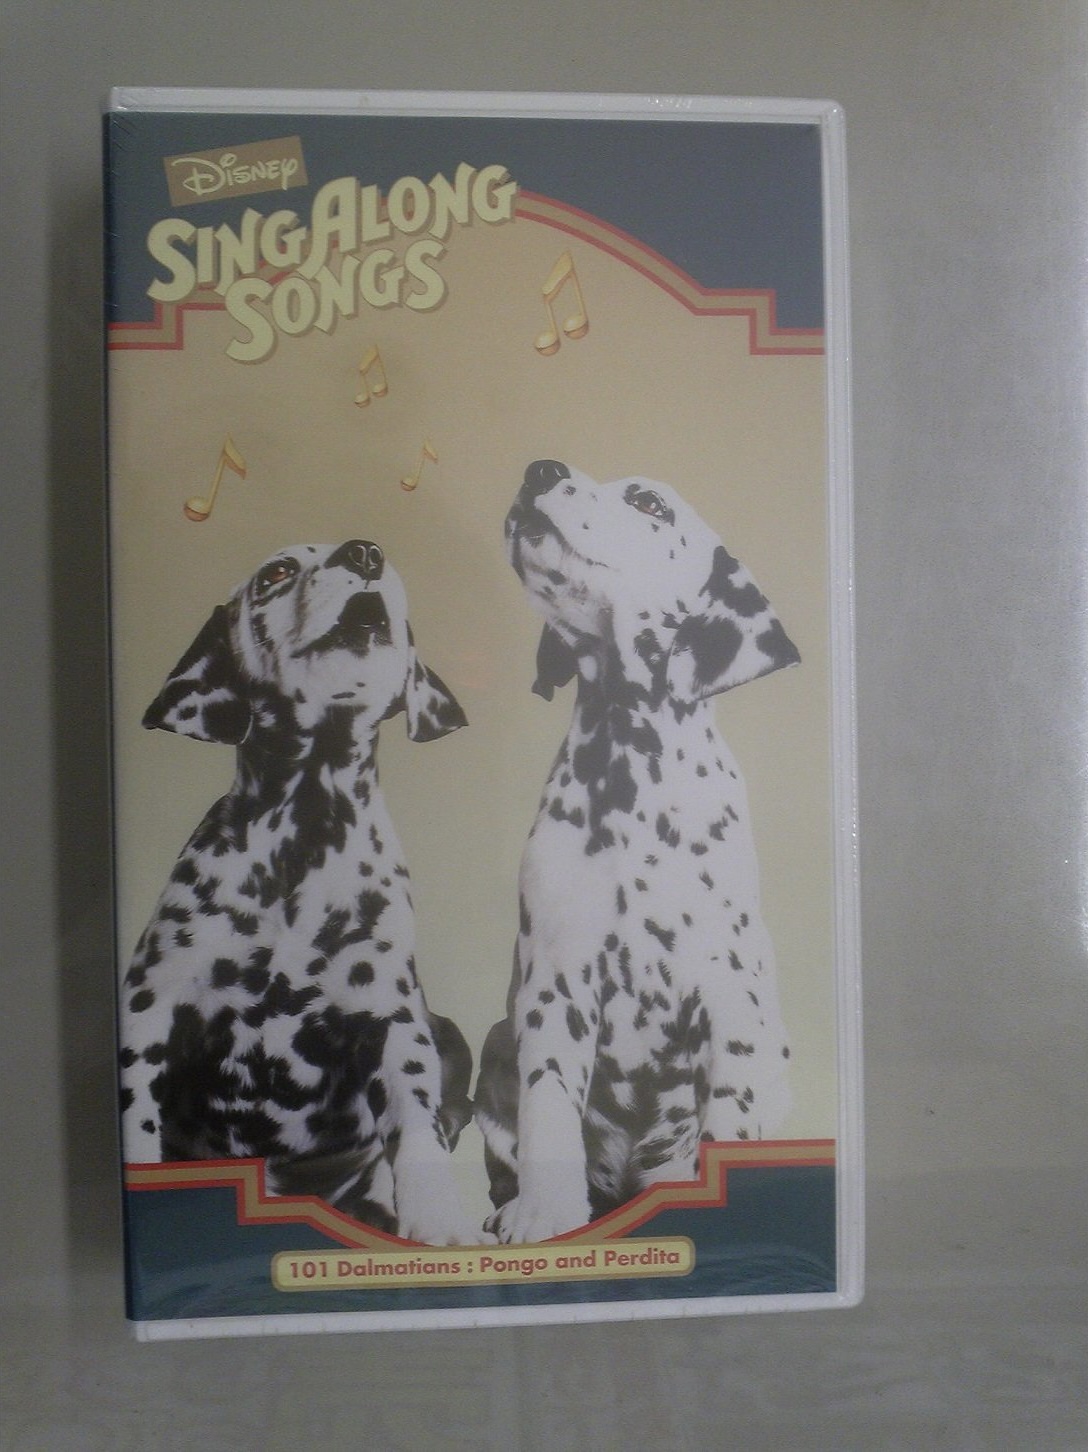 pongo and perdita sing along song cast